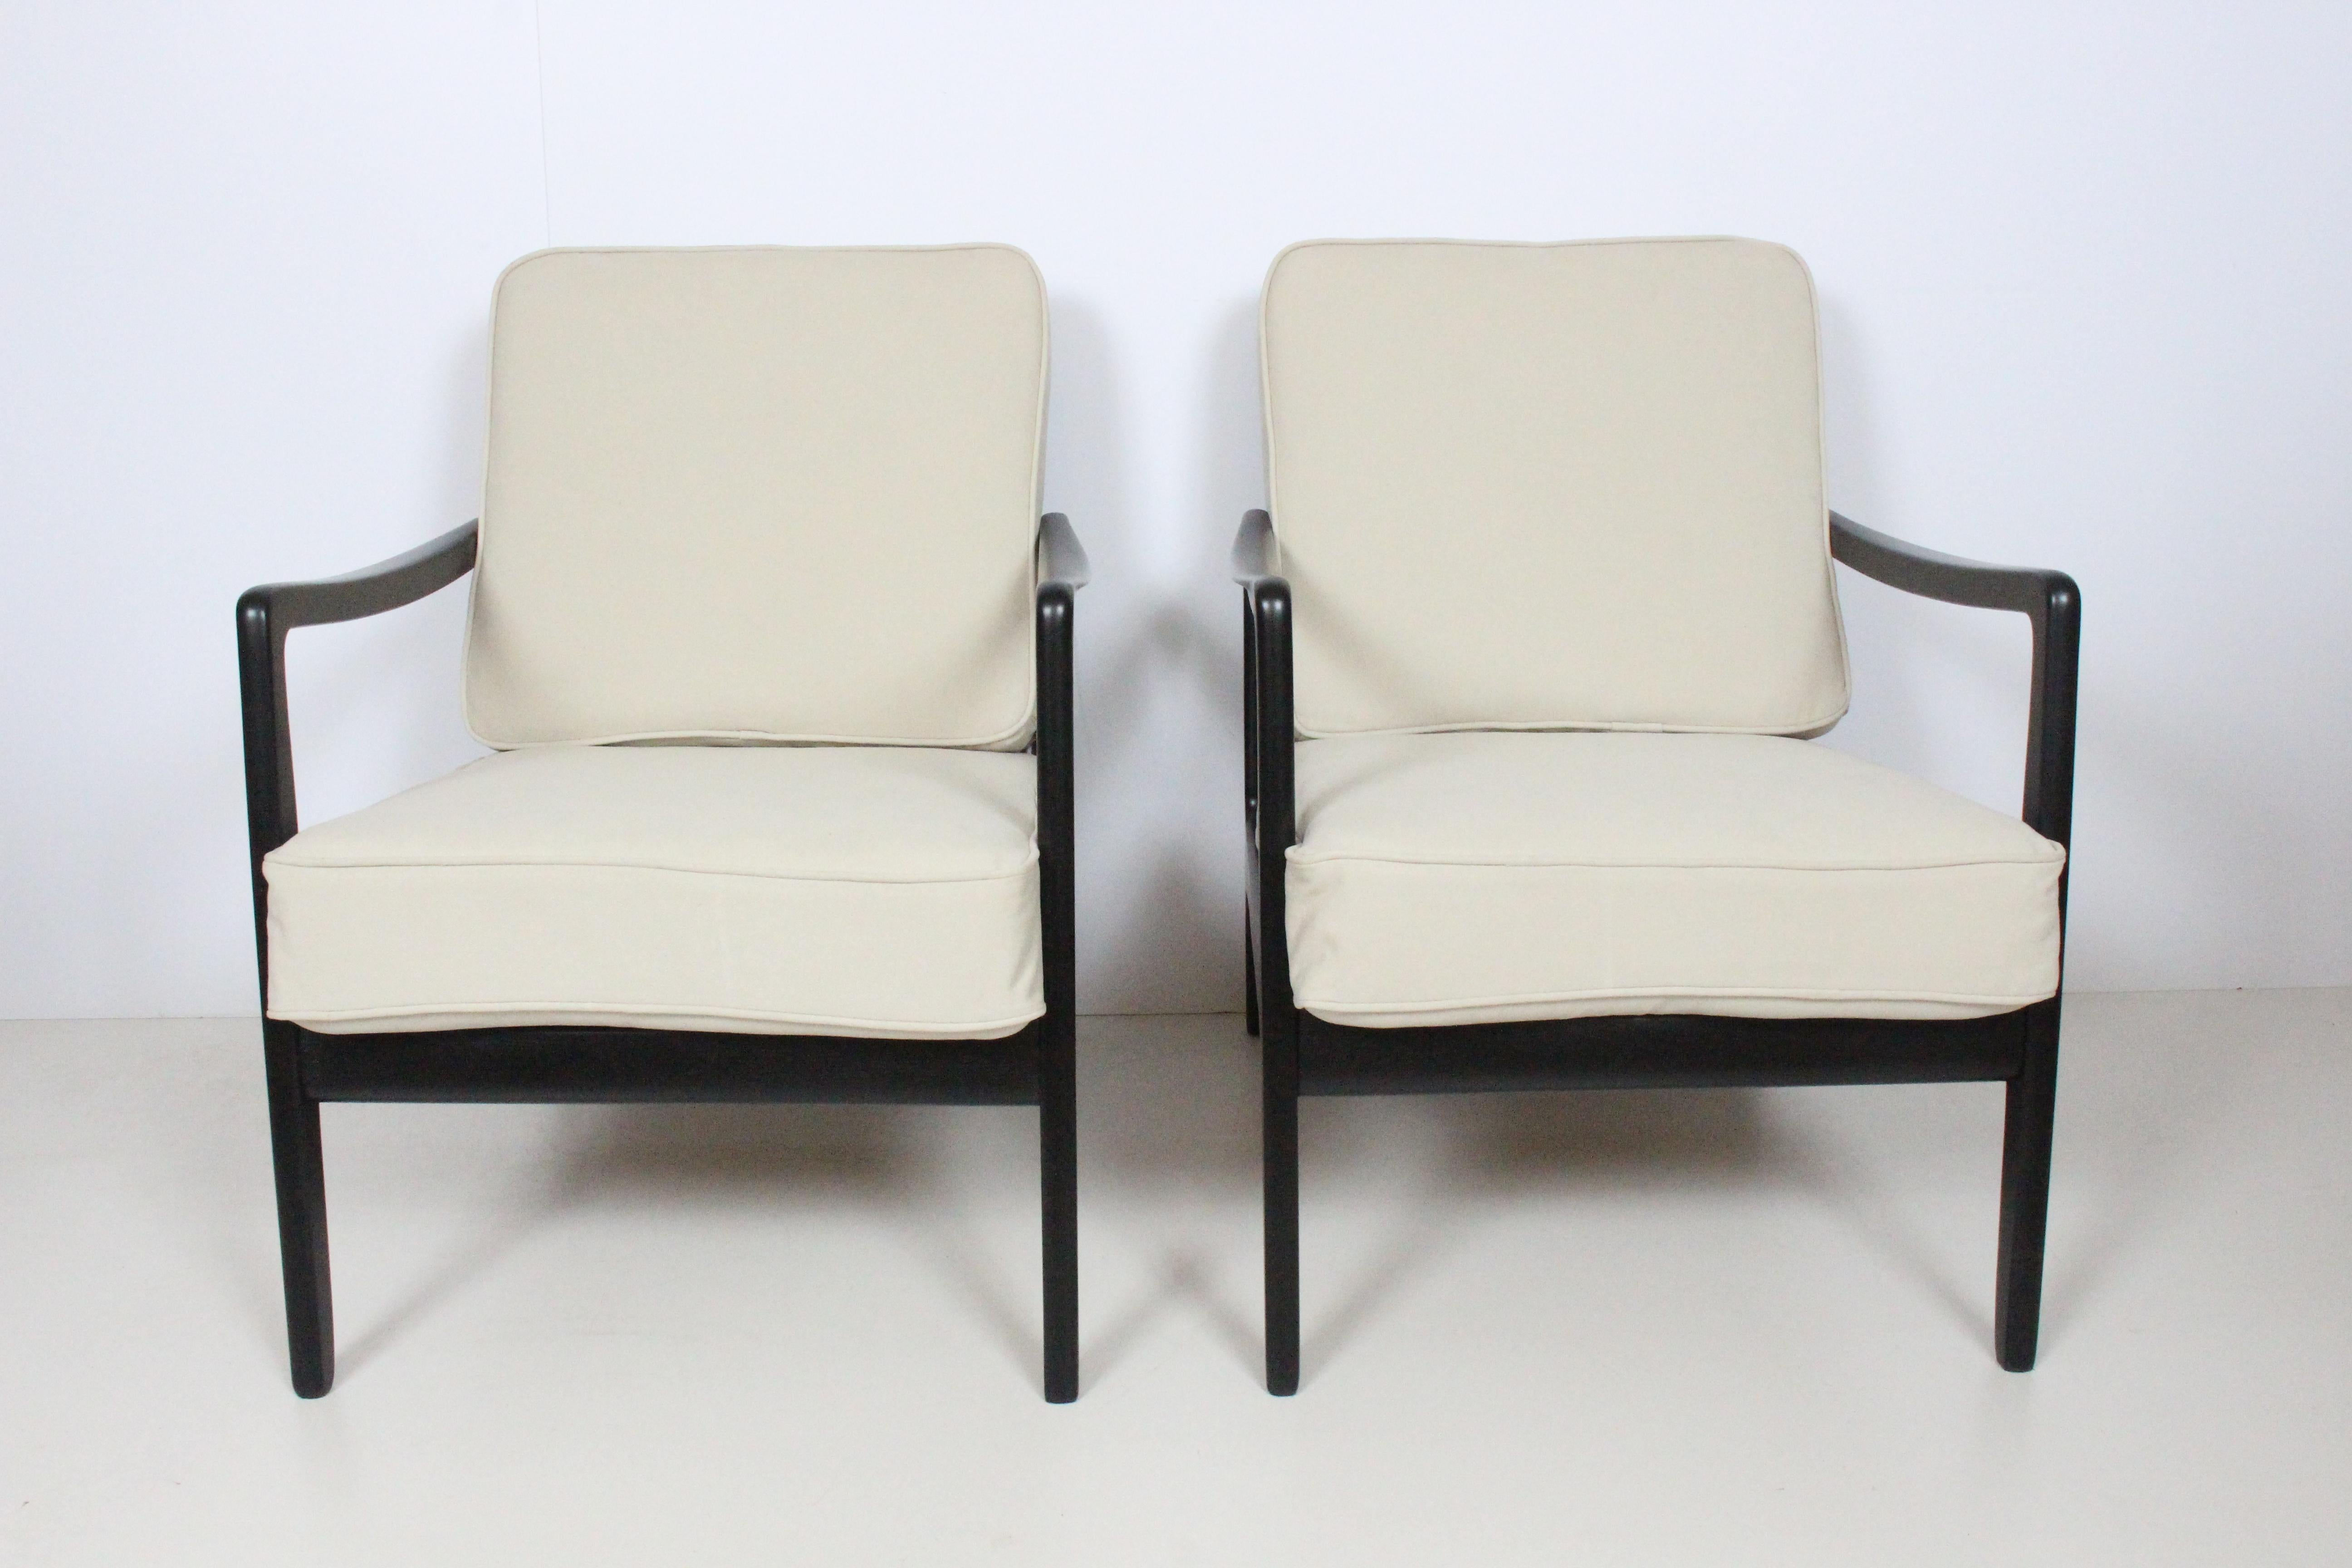 Early Pair of Ole Wanscher Ebonized Mahogany Lounge Chairs, 1950's In Good Condition For Sale In Bainbridge, NY